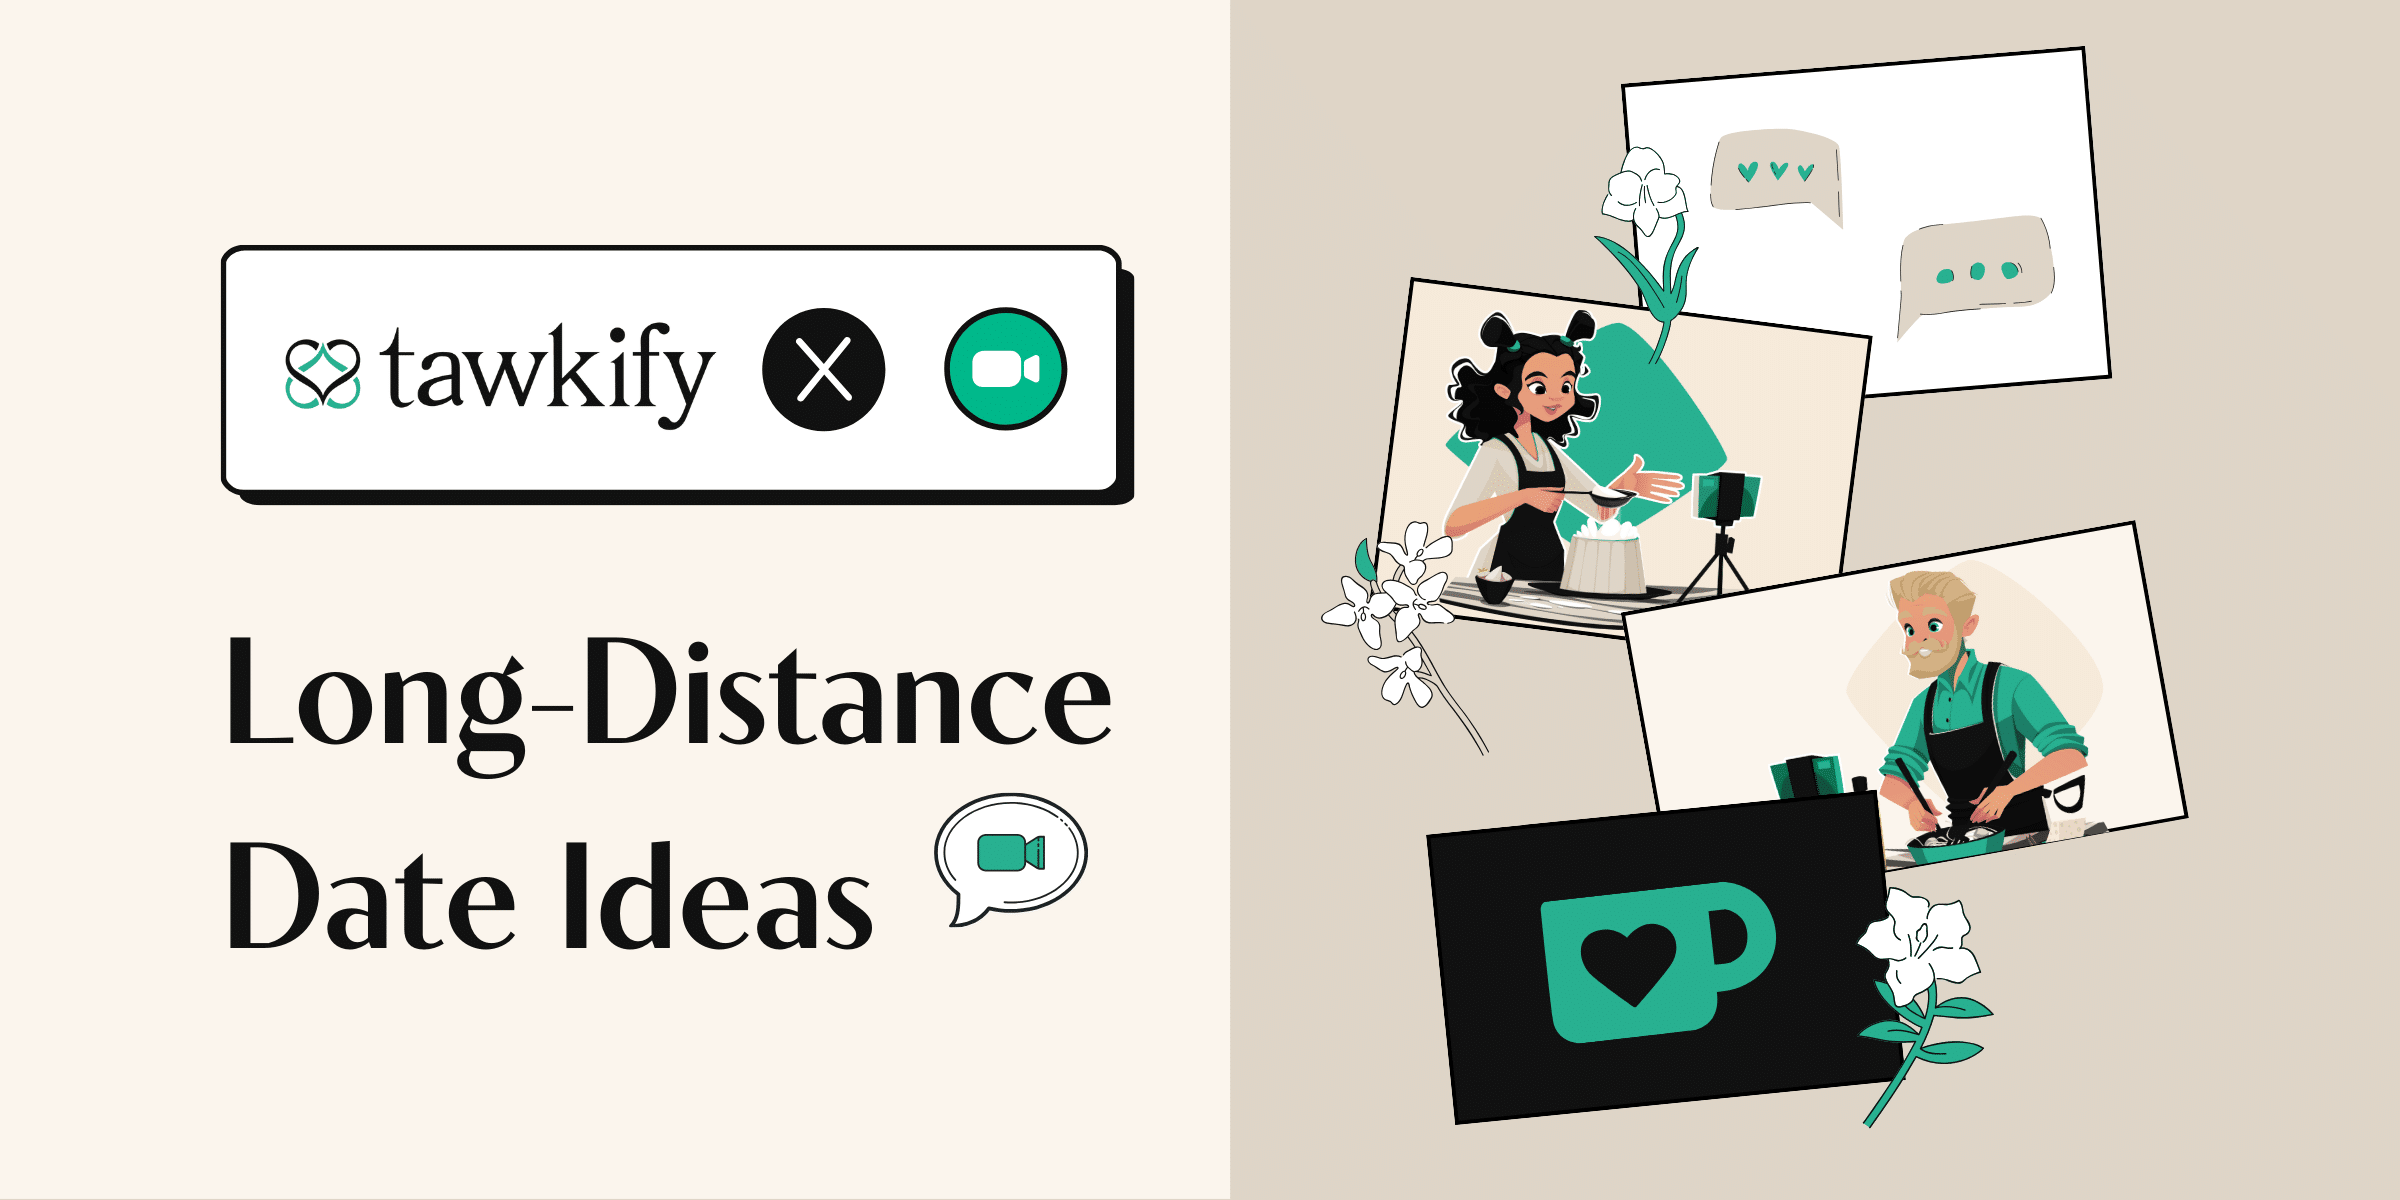 Don’t let distance get in the way of planning a fun date night! Check out these long-distance date ideas to stay connected with your partner.